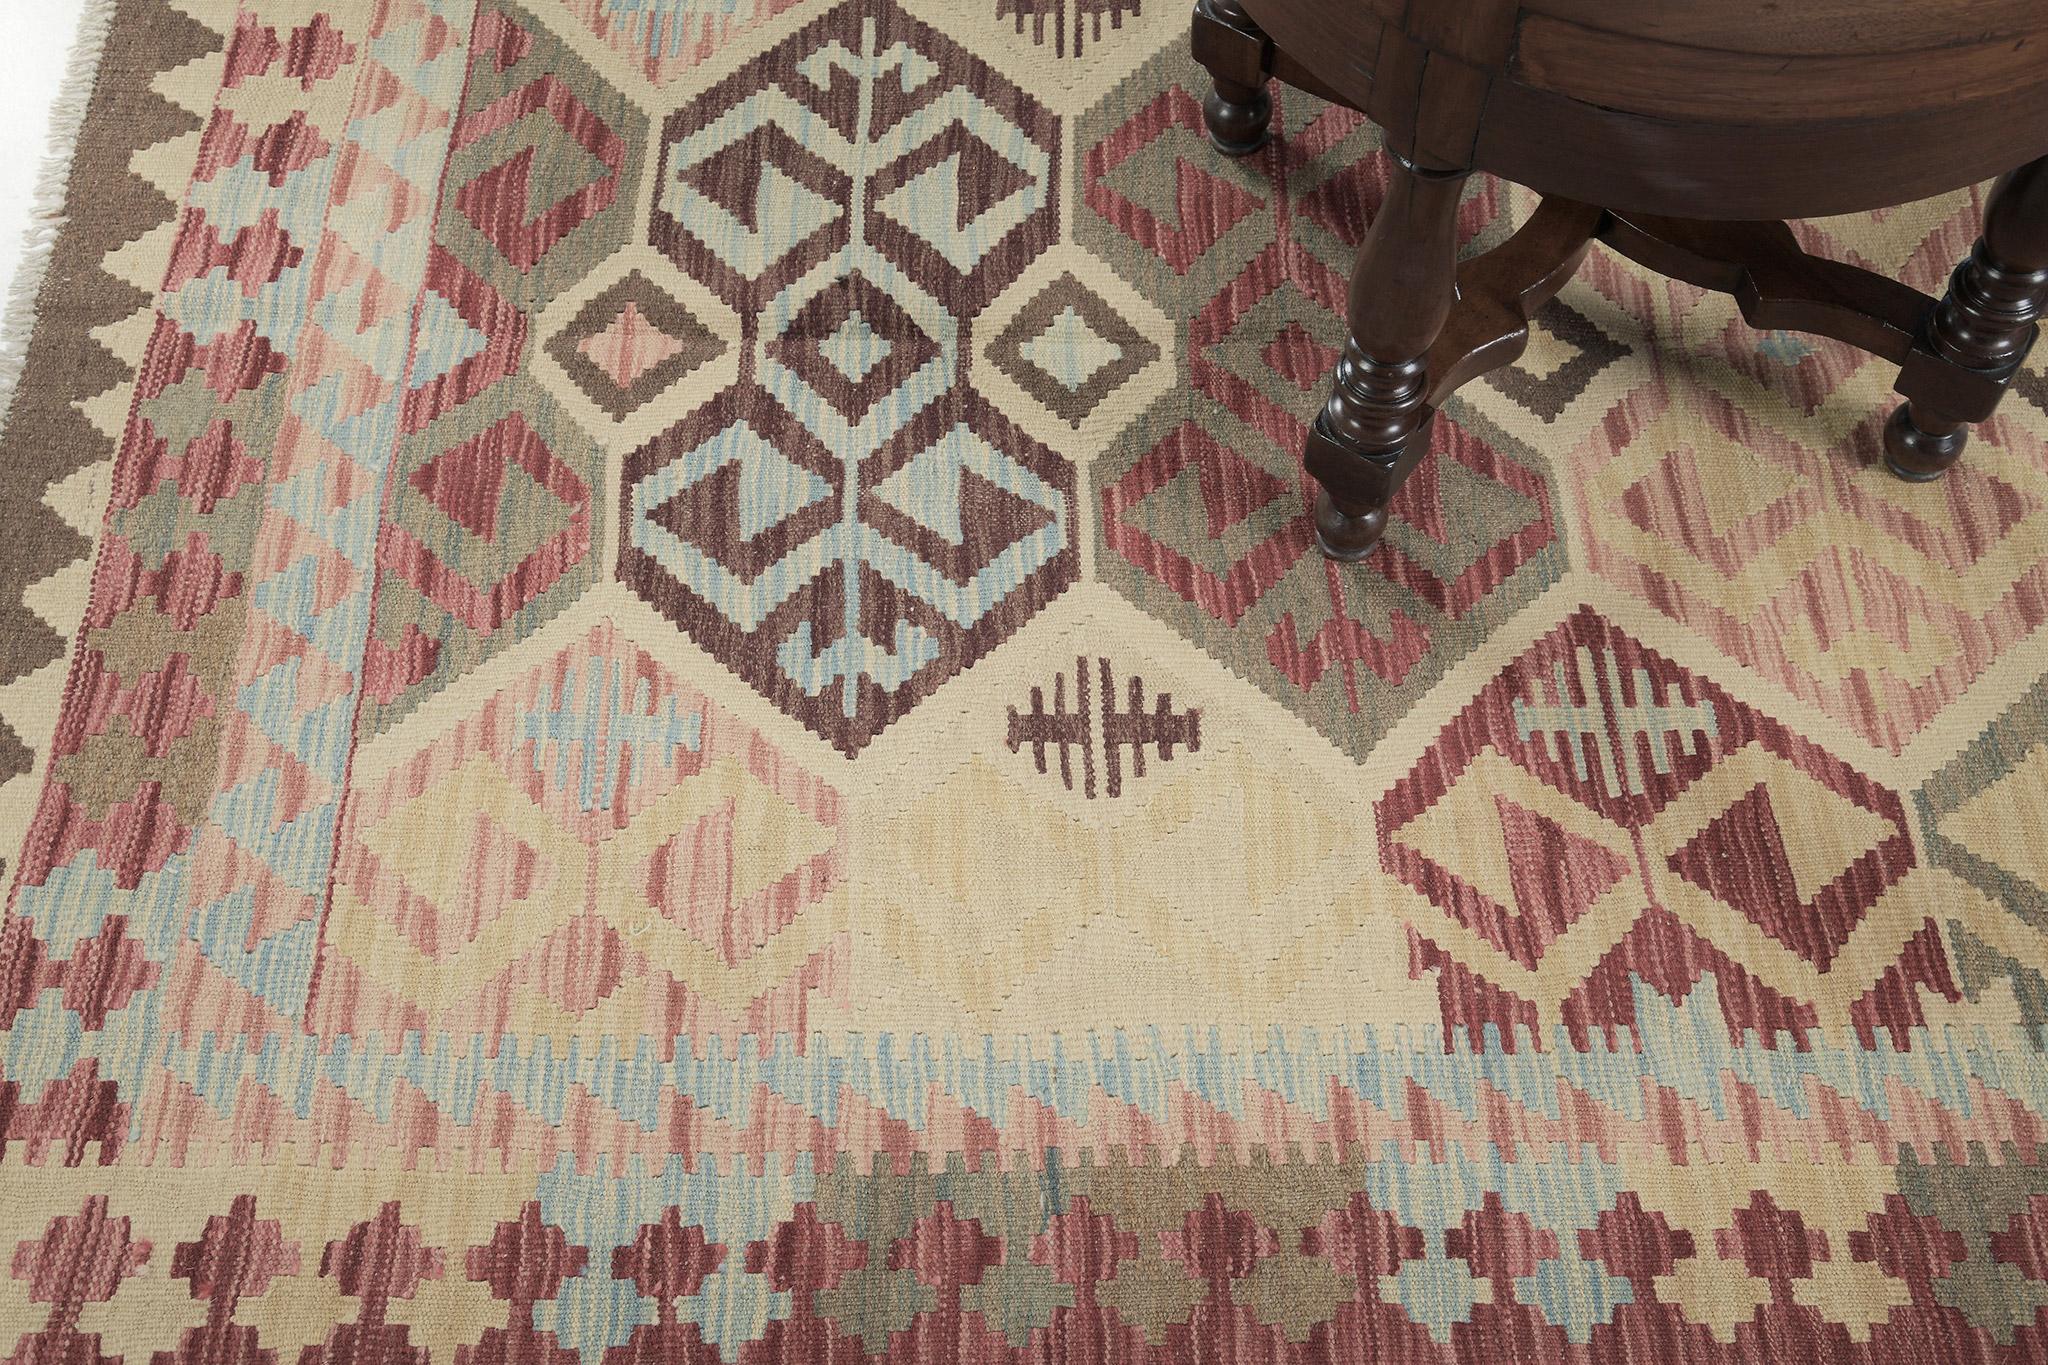 Scorpion patterns are featured in this stunning masterpiece. Yellow, red, brown, and some variegated tones of blue and white, are perfectly woven in this Kilim. An oversized rug that can fill in your spaces.

Rug Number
24953
Size
5' 7